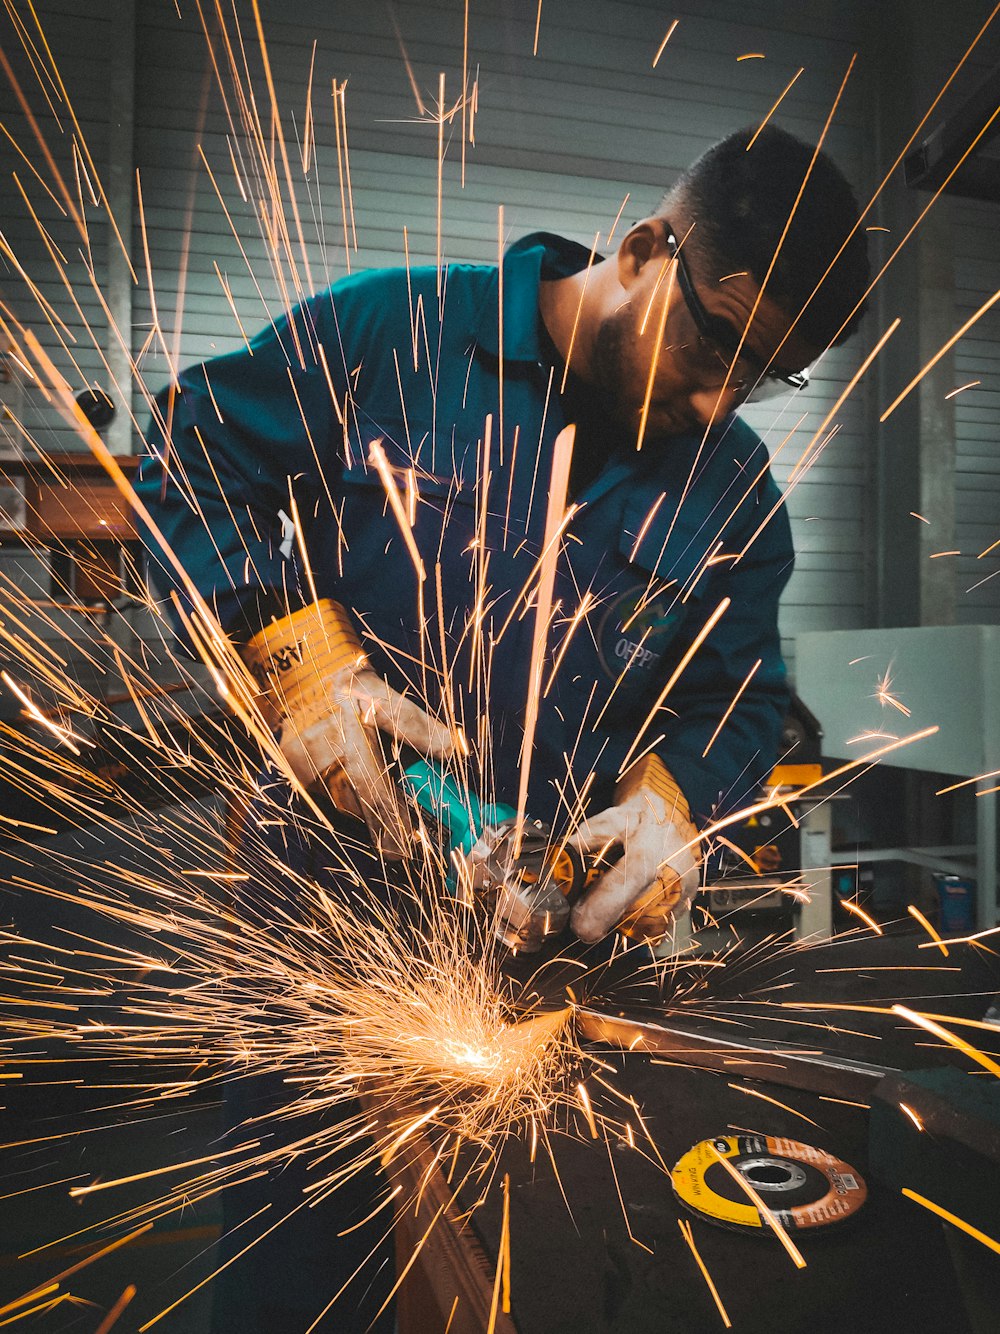 a man working on a piece of metal with a grinder